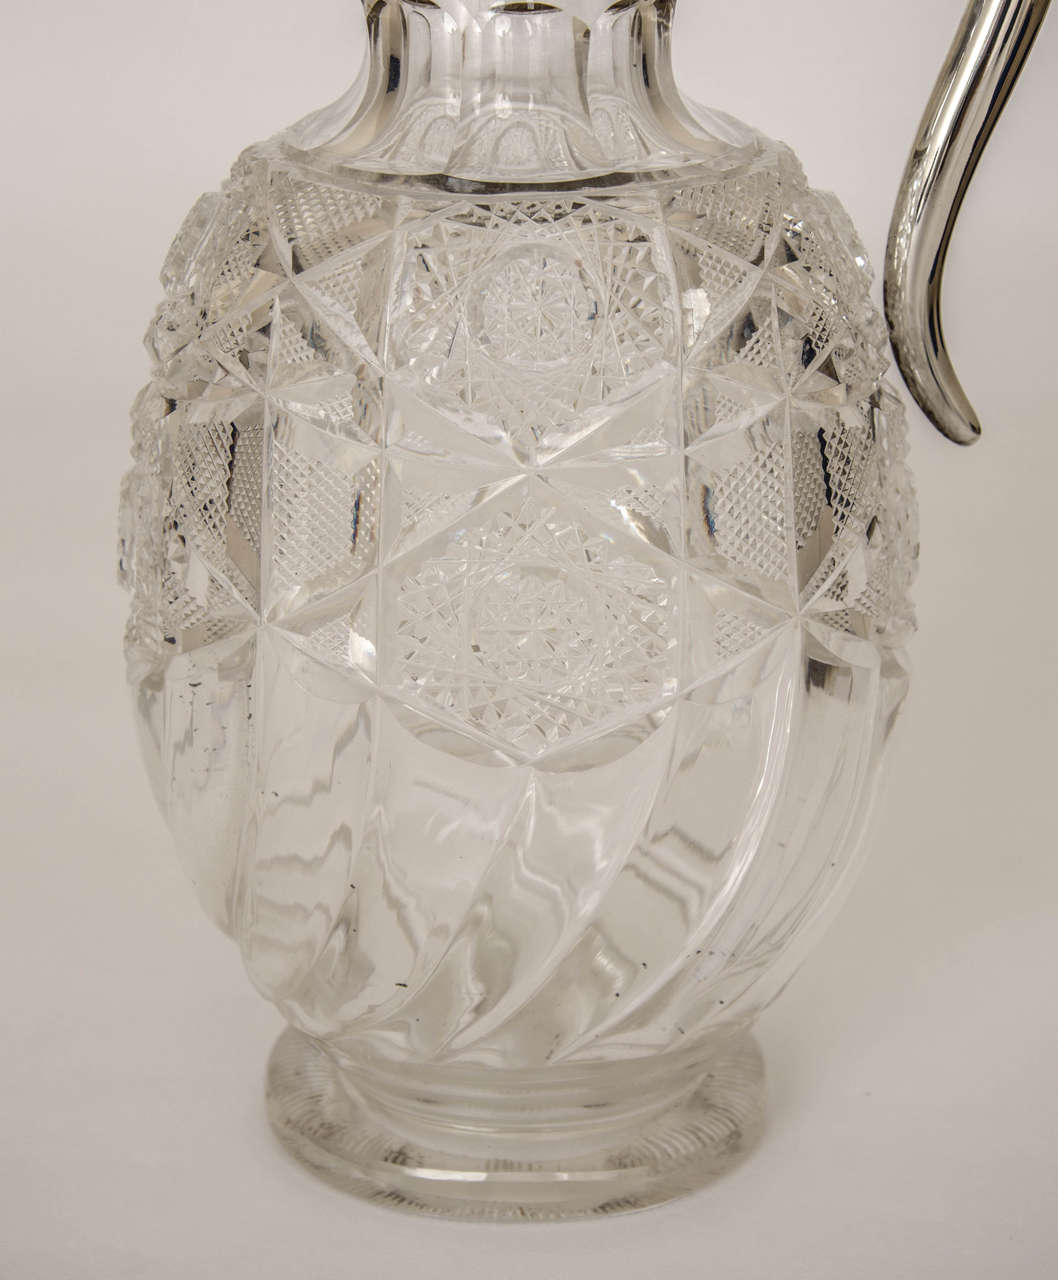 Edwardian Sterling Silver Mounted Claret Jug Made by Mappin & Webb in 1909 For Sale